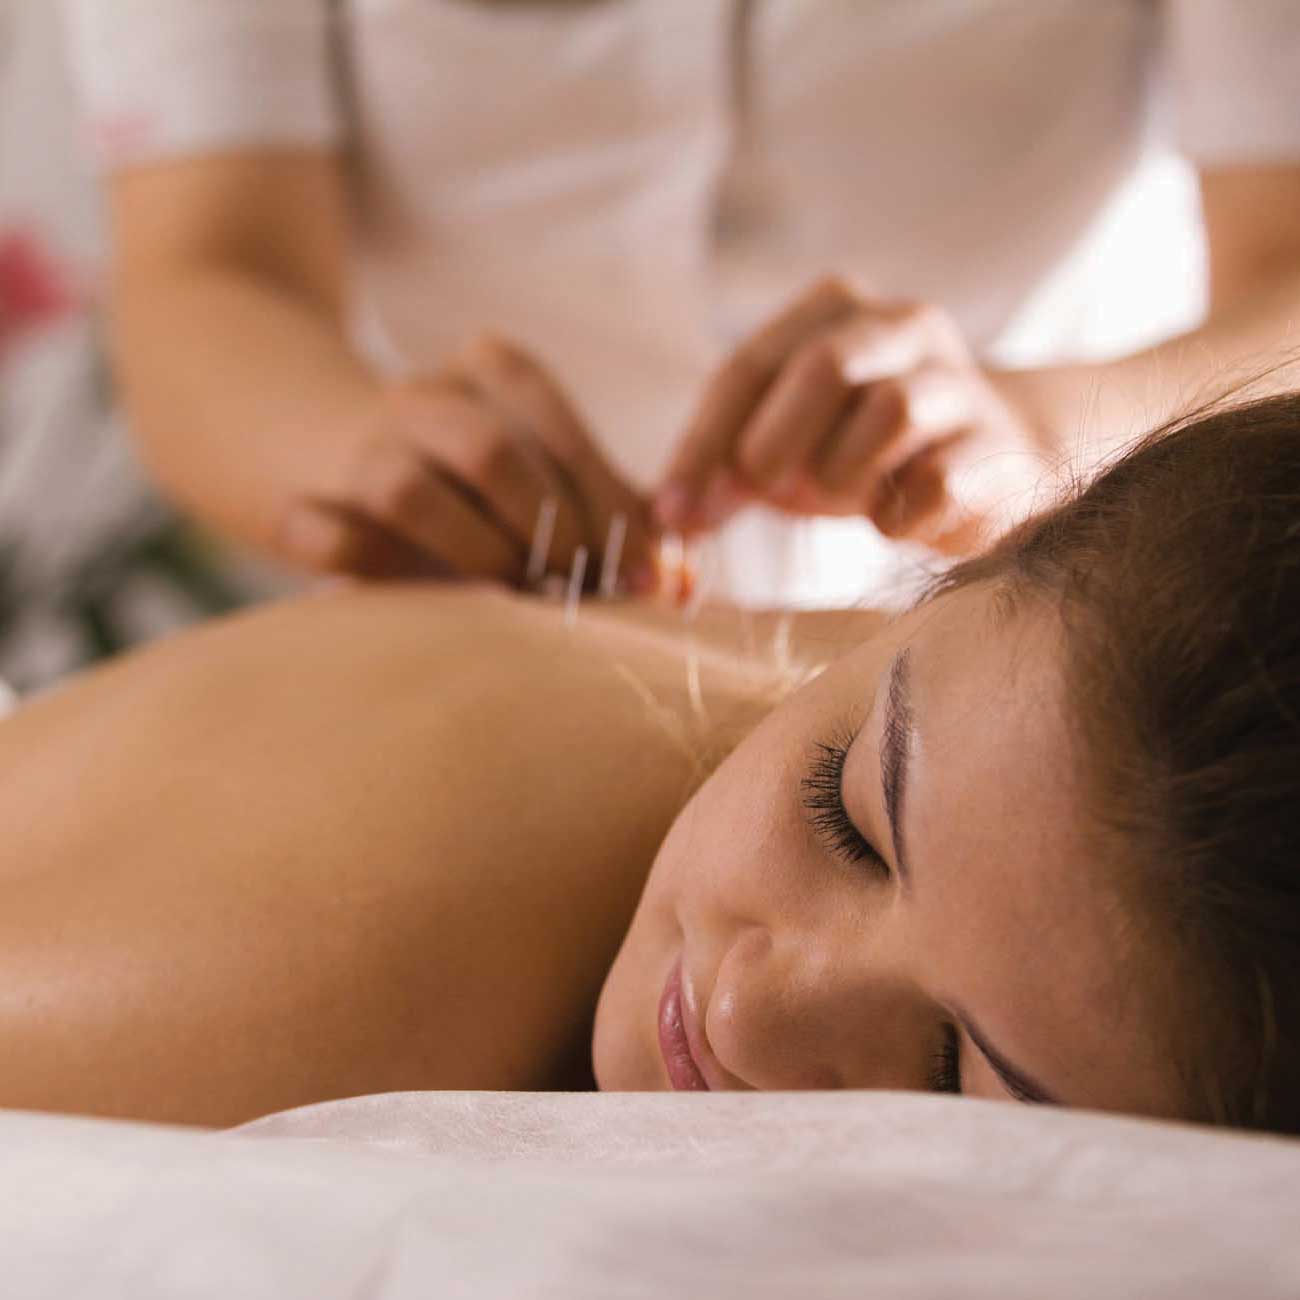 Stimulate your body's natural healing abilities. Our acupuncture treatments can help.